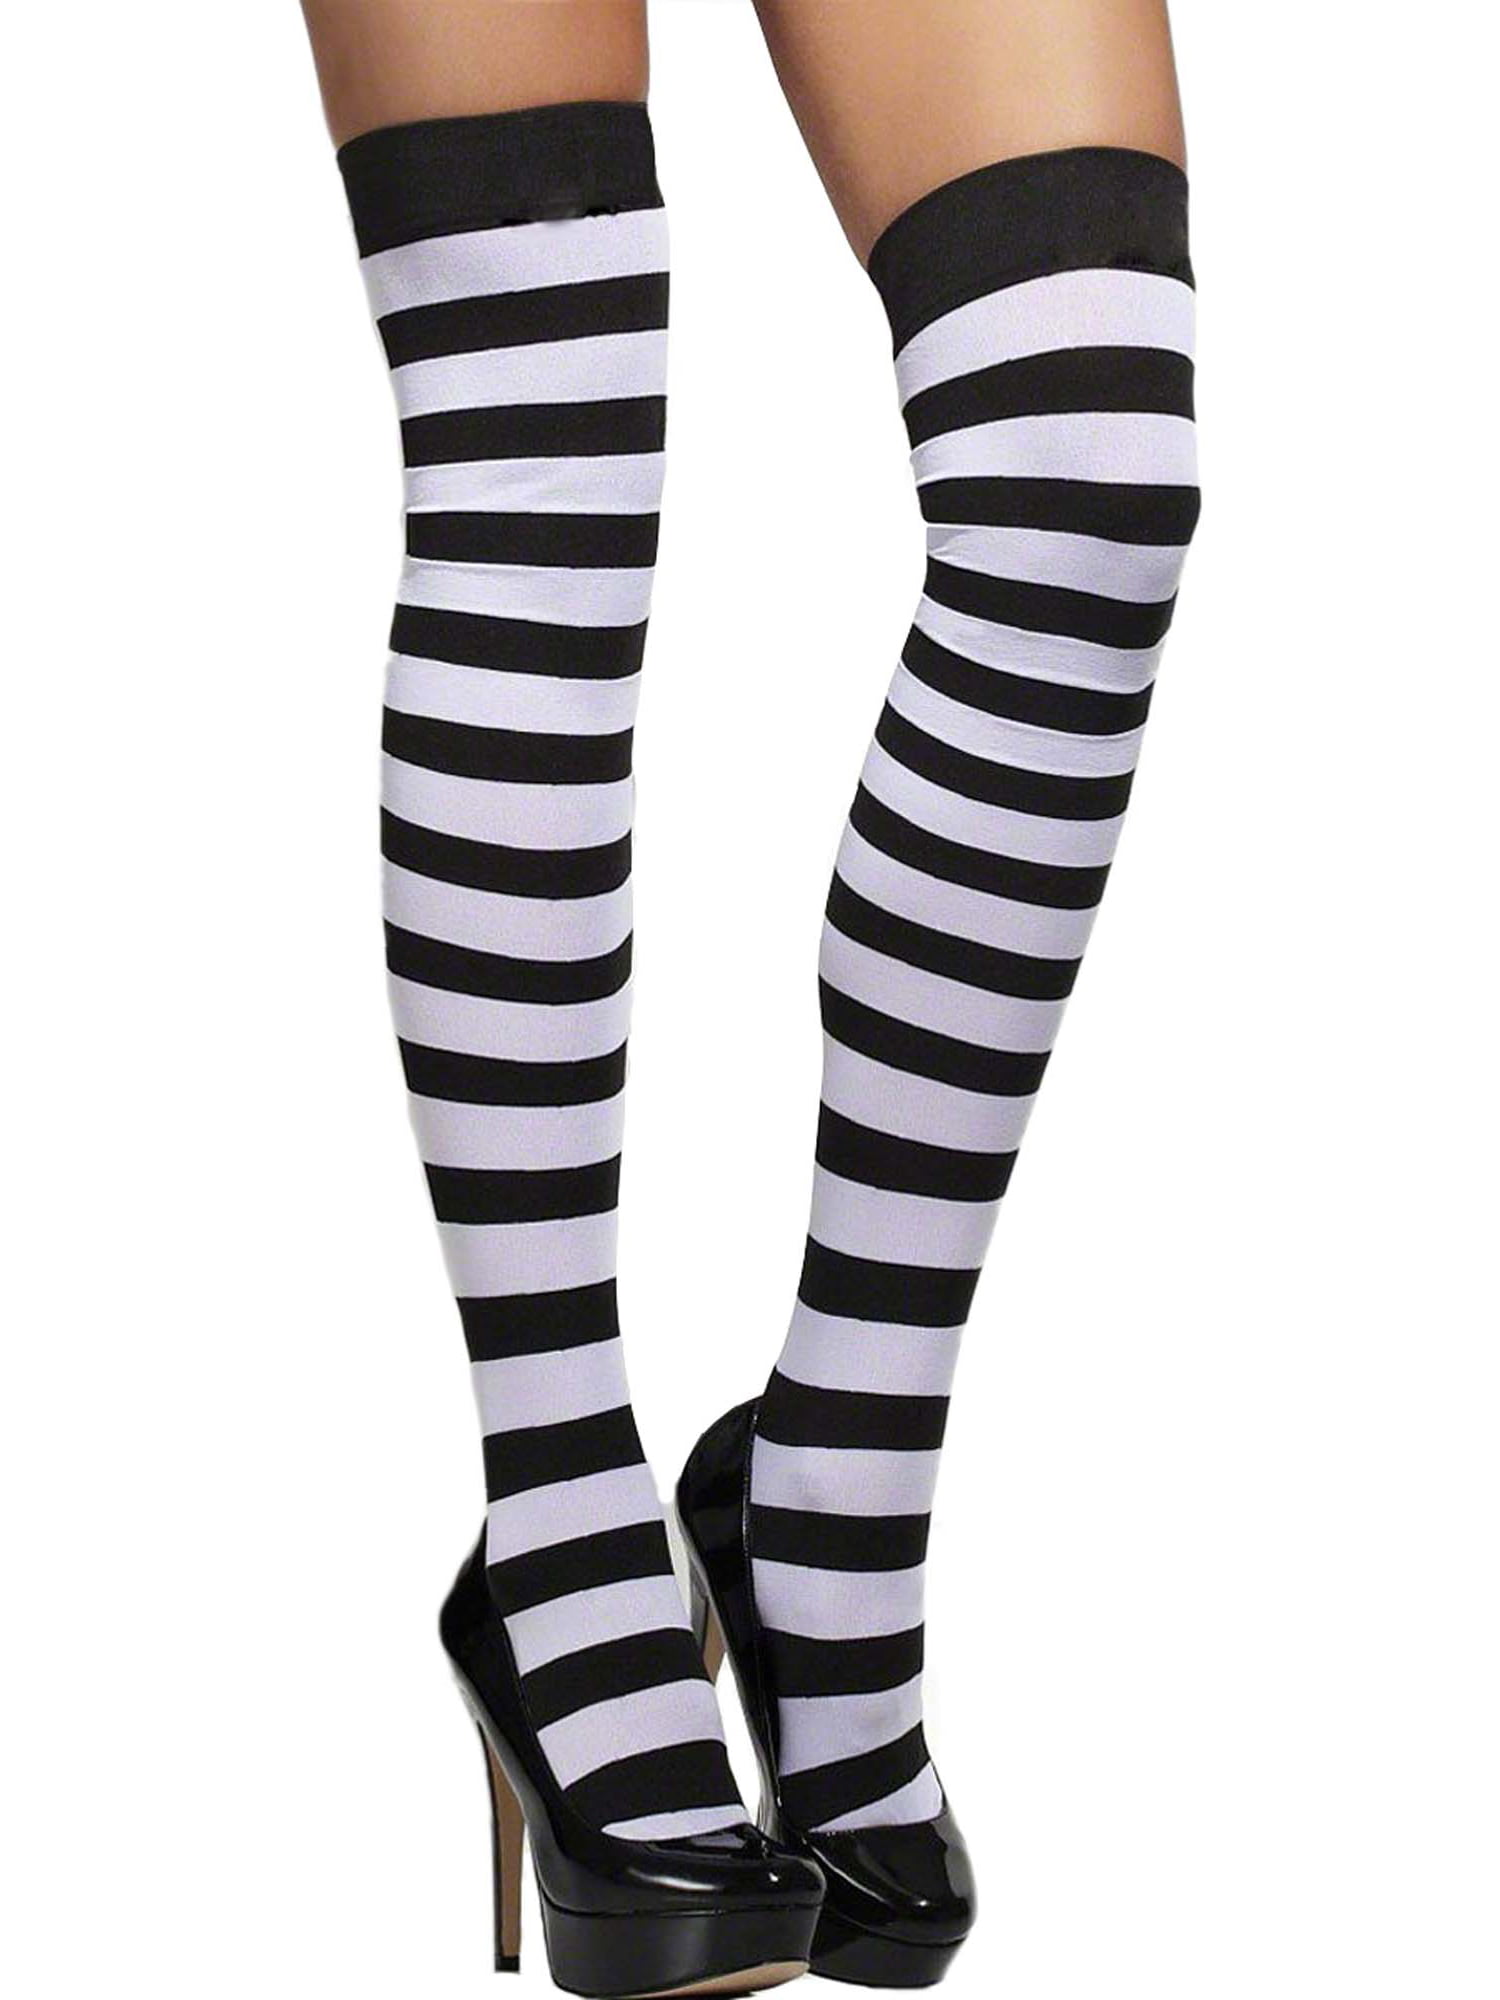 Sexy Classic Striped Nylon Stocking Thigh Highs Hosiery- Fits up to ...